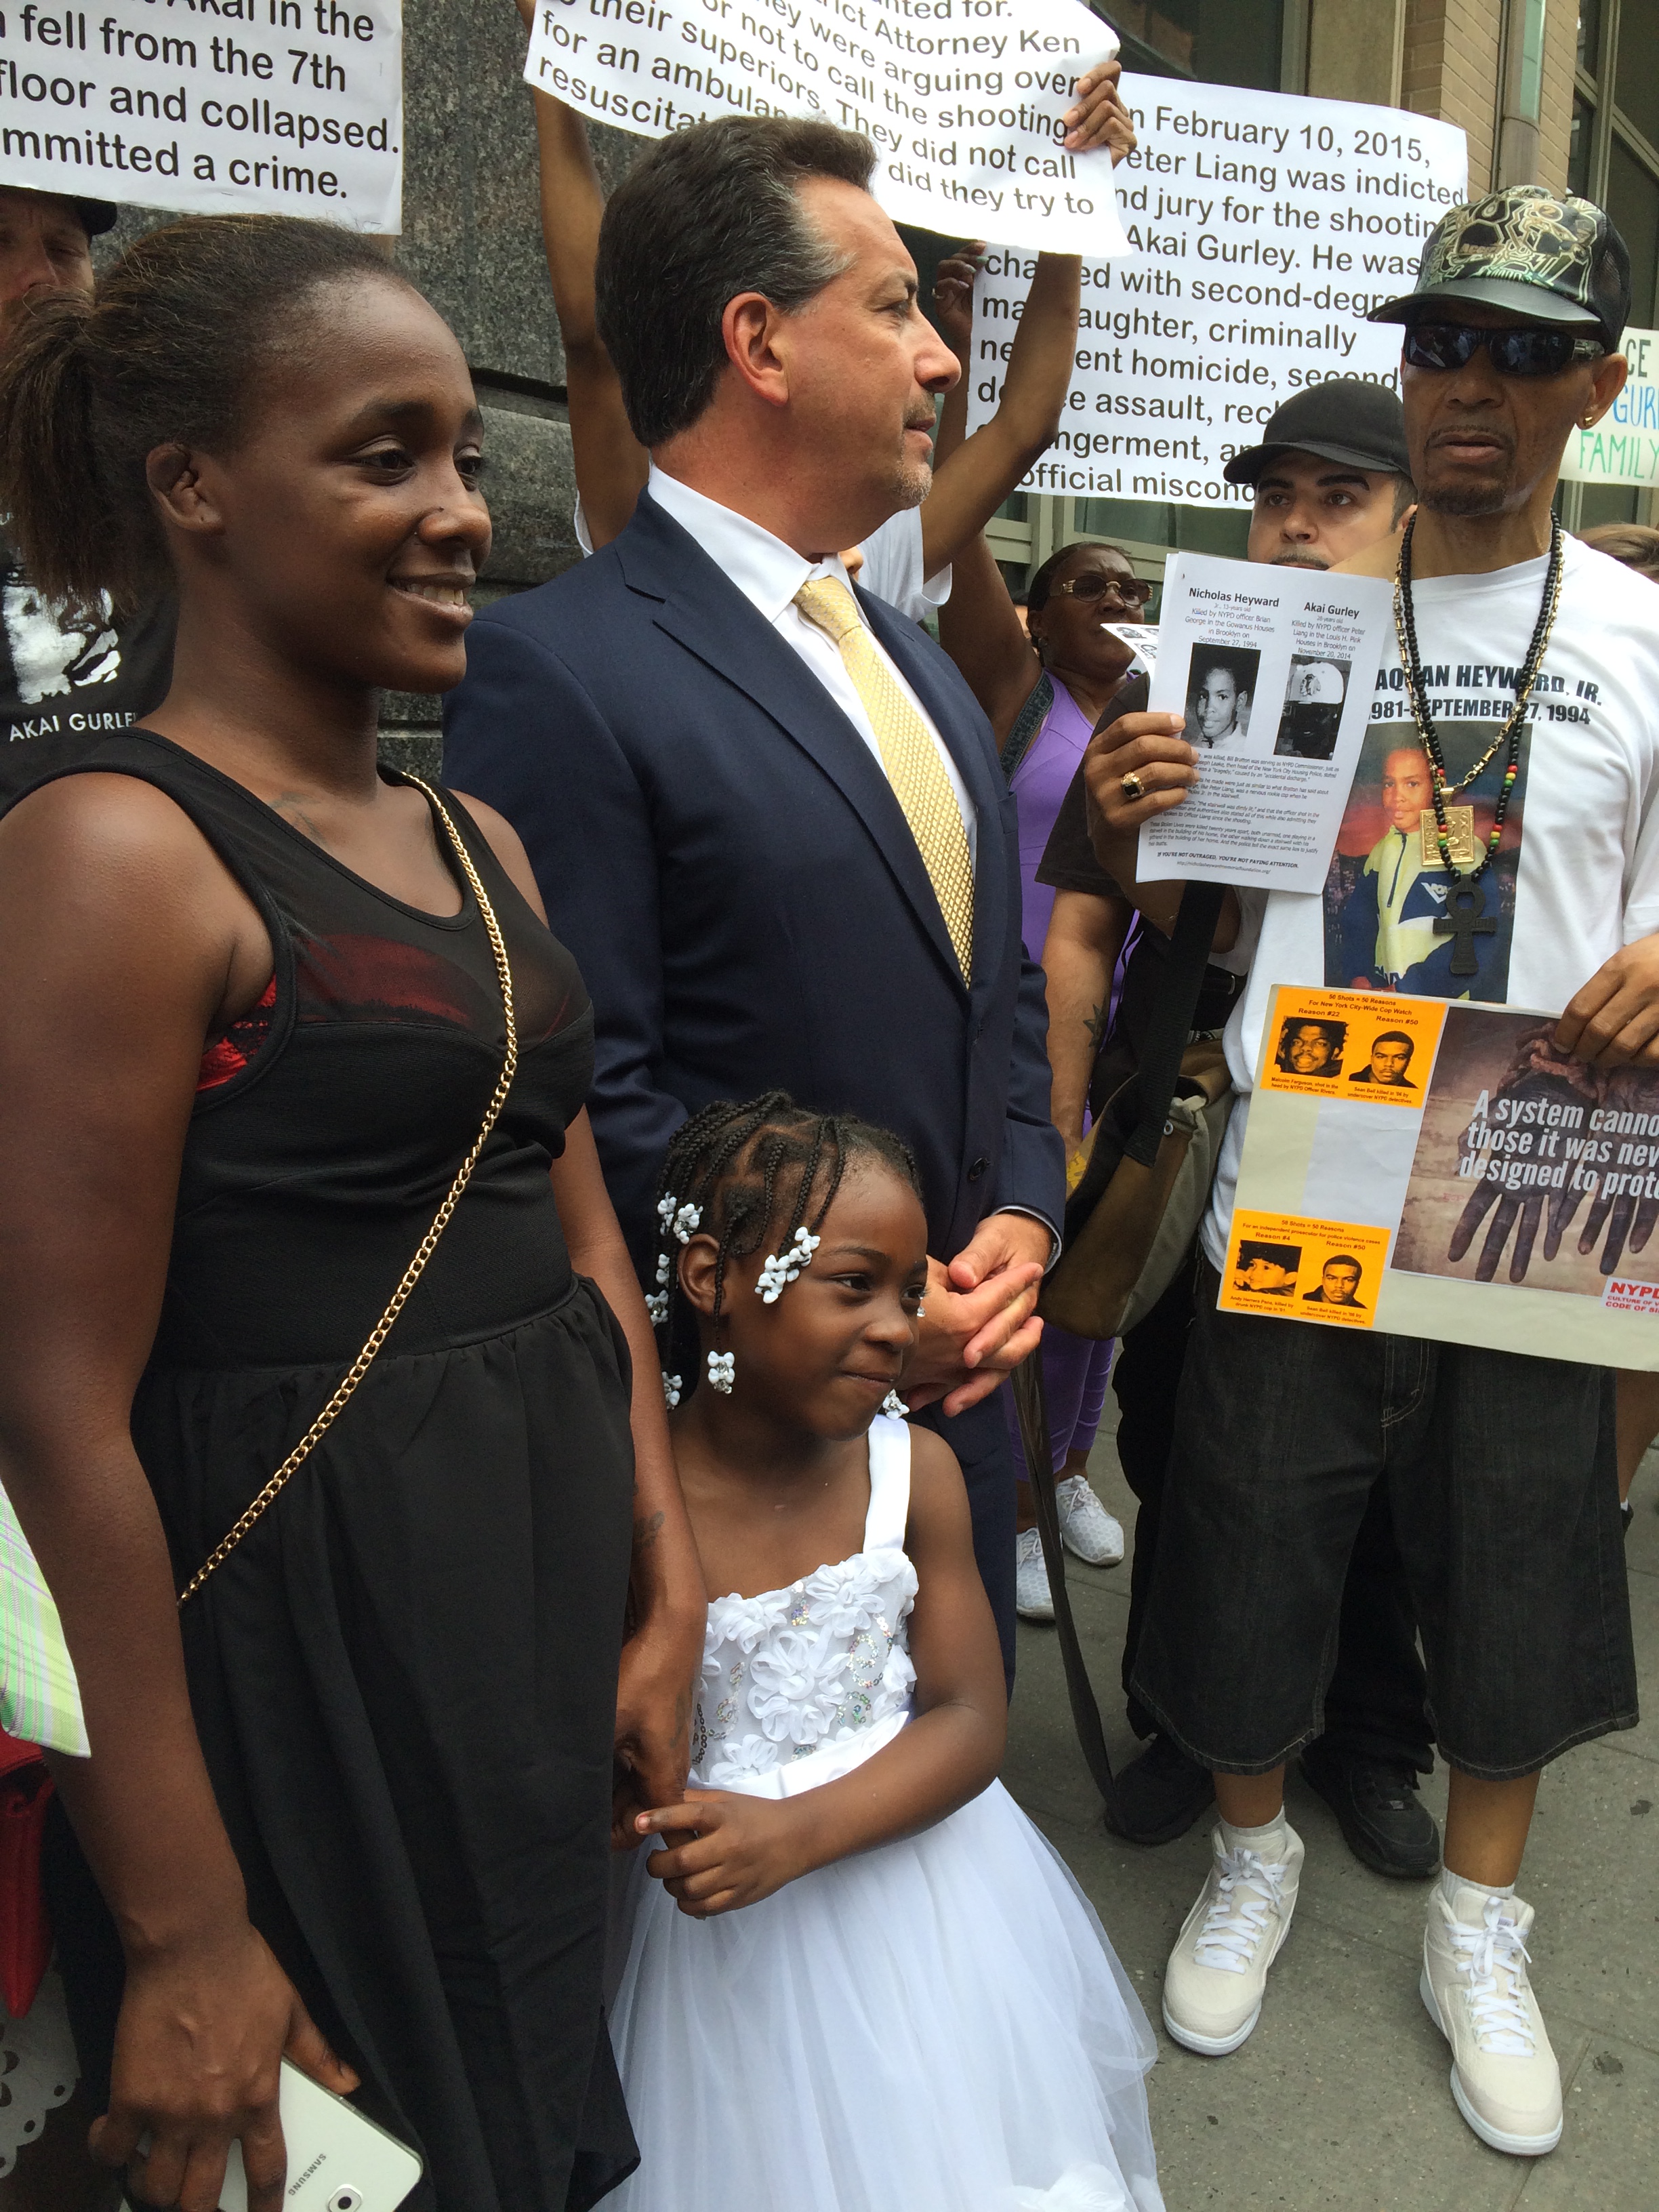 Akai Gurley's girlfriend, Kimberly Ballinger, and daughter stand with protesters outside  a hearing for accused NYPD officer Peter Liang (credit: Sonia Rincon/1010 WINS)